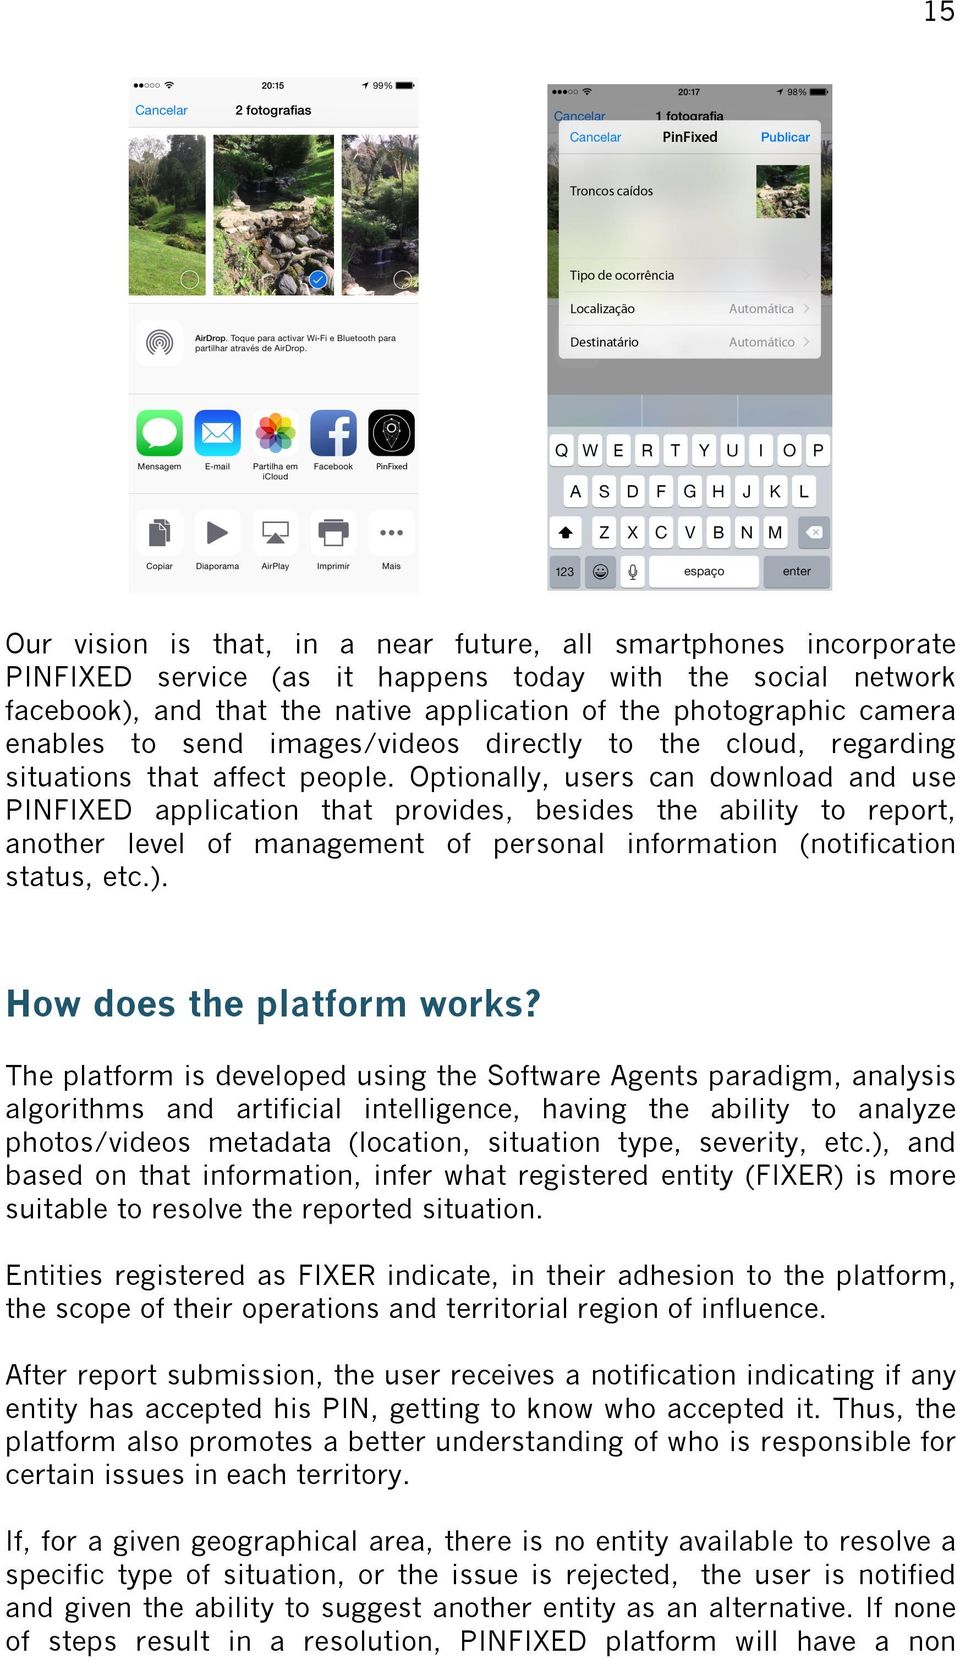 Optionally, users can download and use PINFIXED application that provides, besides the ability to report, another level of management of personal information (notification status, etc.).